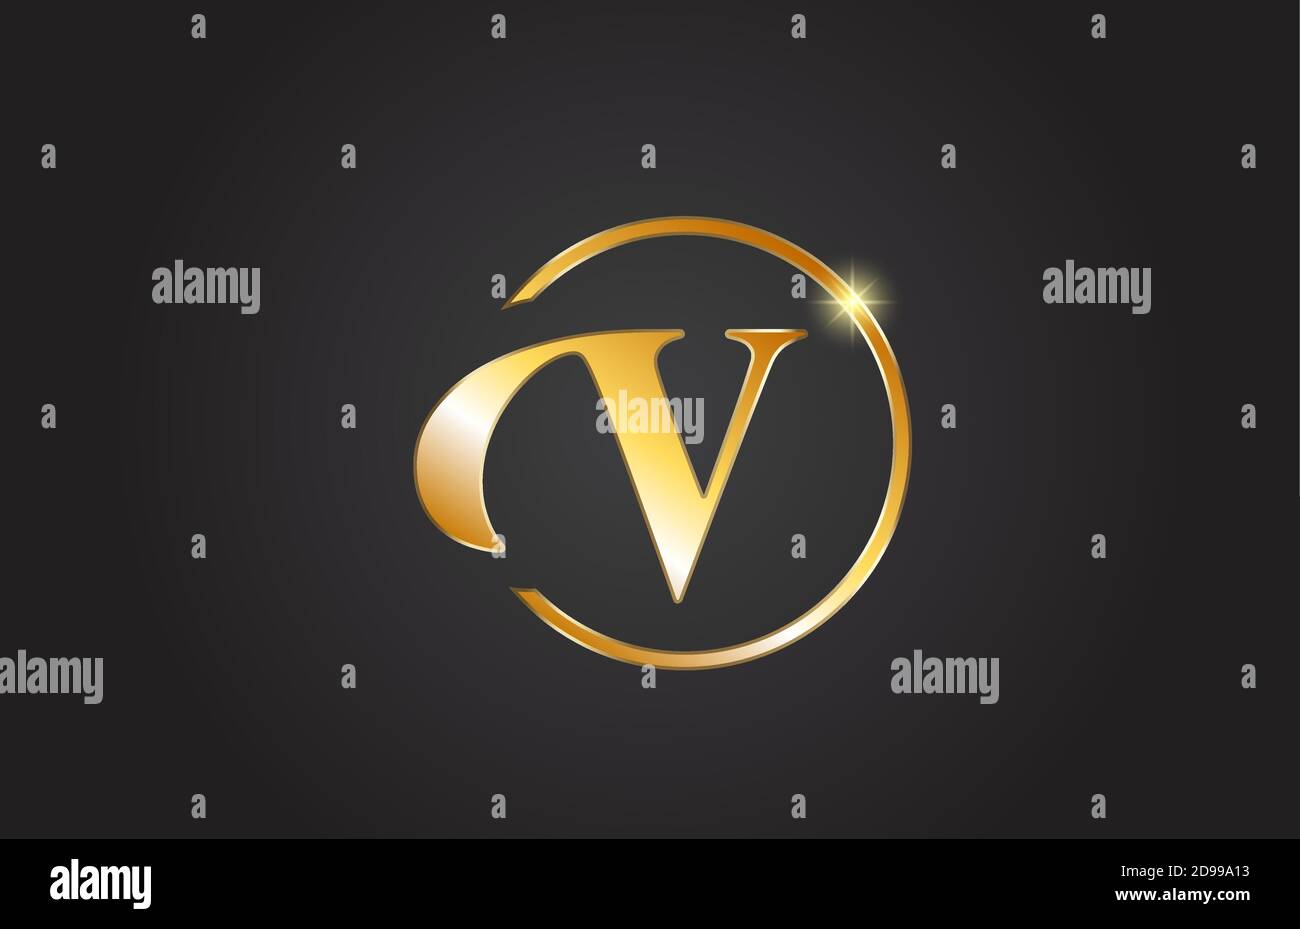 Golden V Alphabet Letter Logo Icon In Yellow And Black Color Simple And Creative Gold Circle Design For Company And Business Stock Vector Image Art Alamy